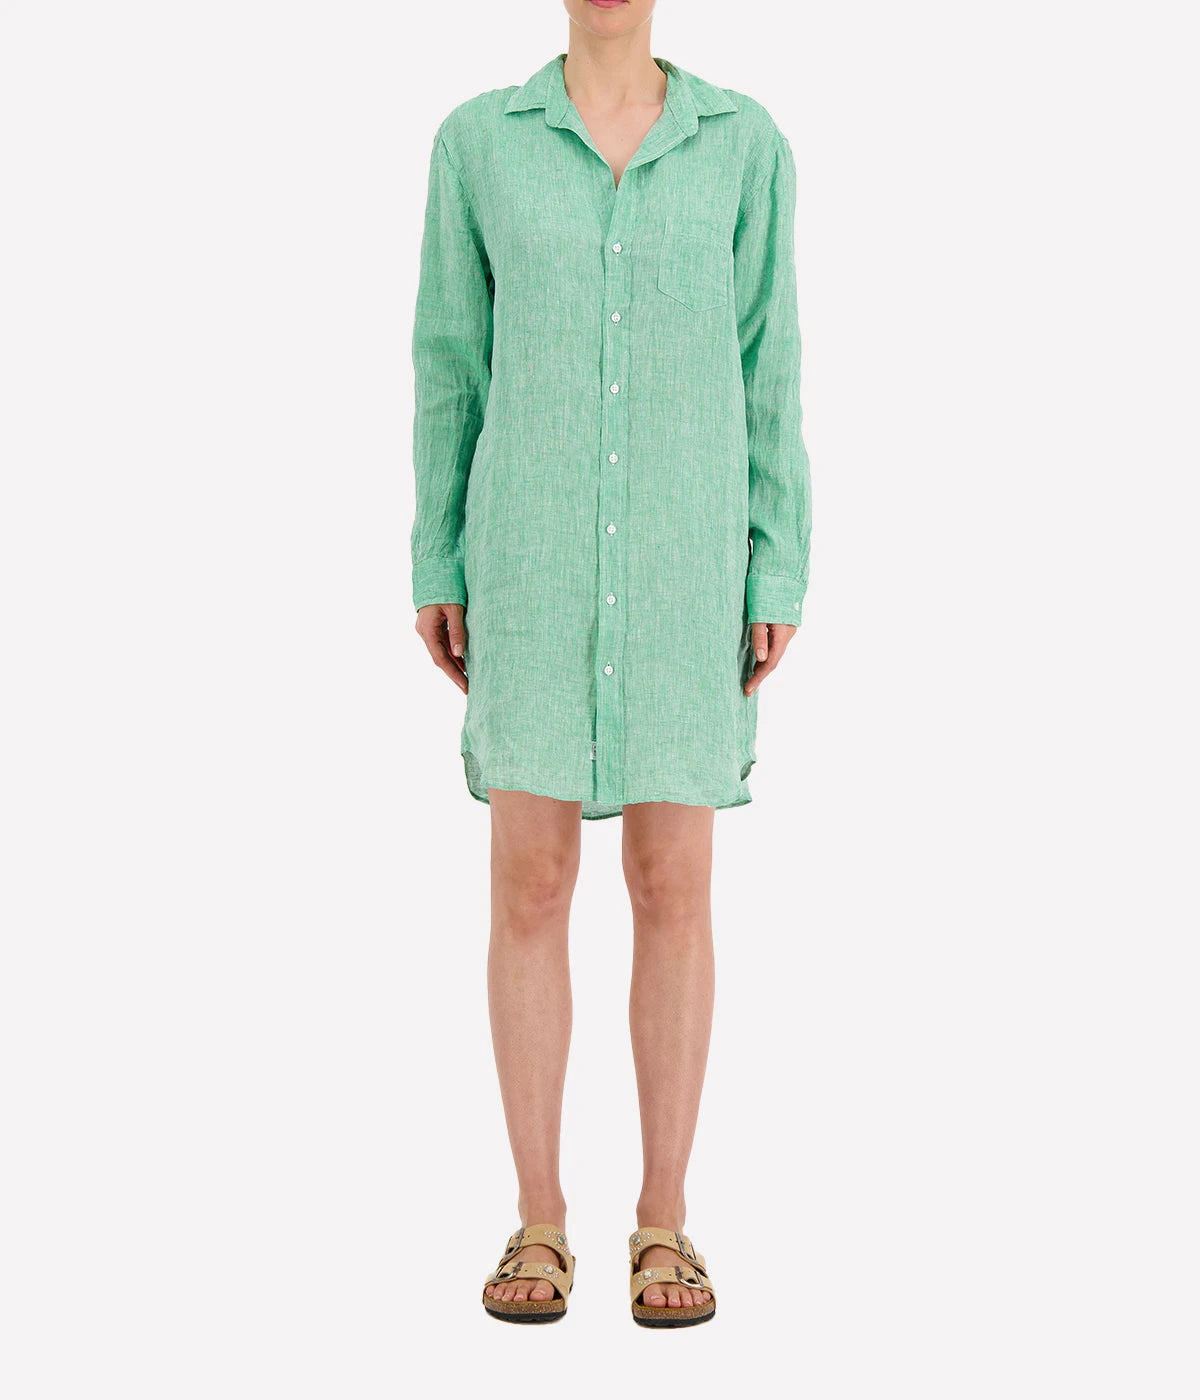 Mary Woven Button Up Dress in Green